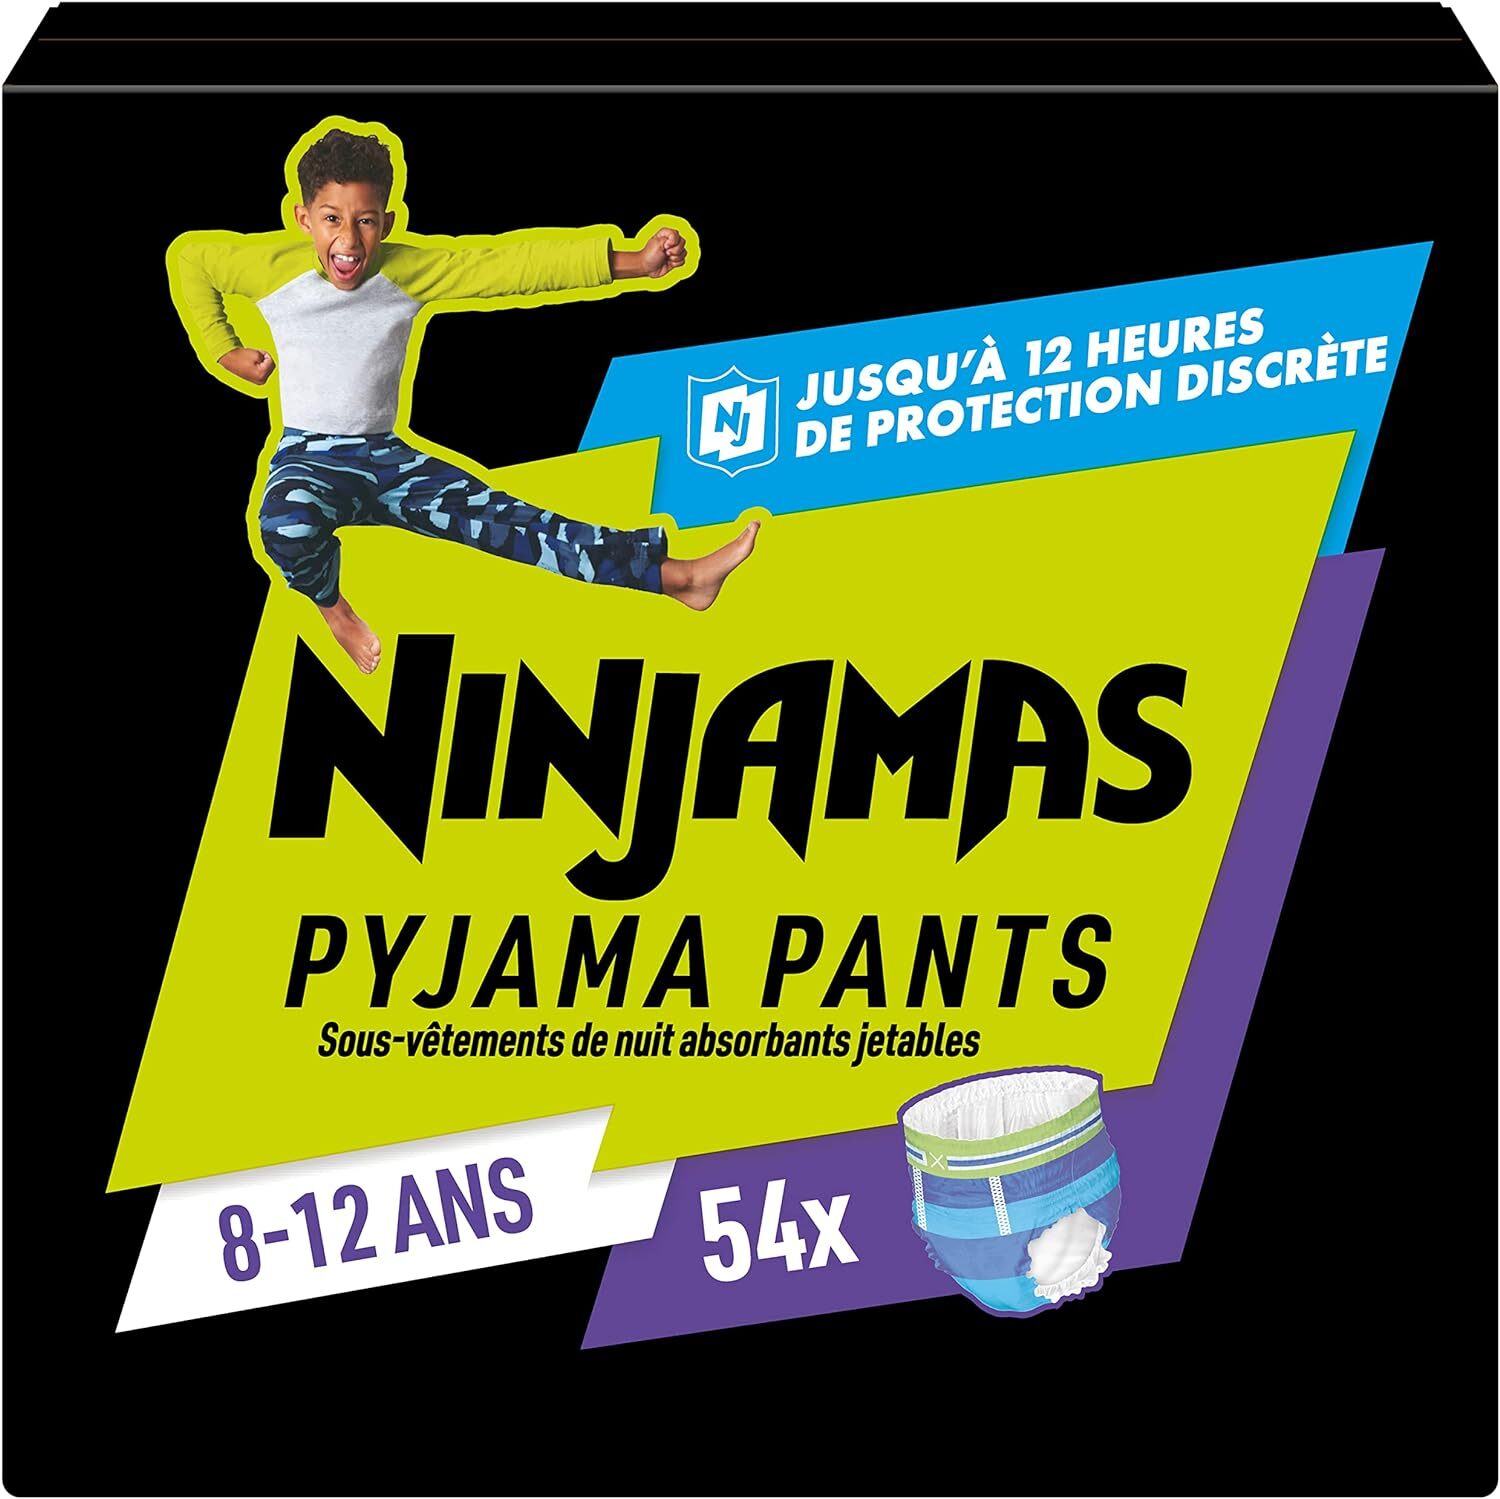 Pampers Ninjamas Couches-Culottes